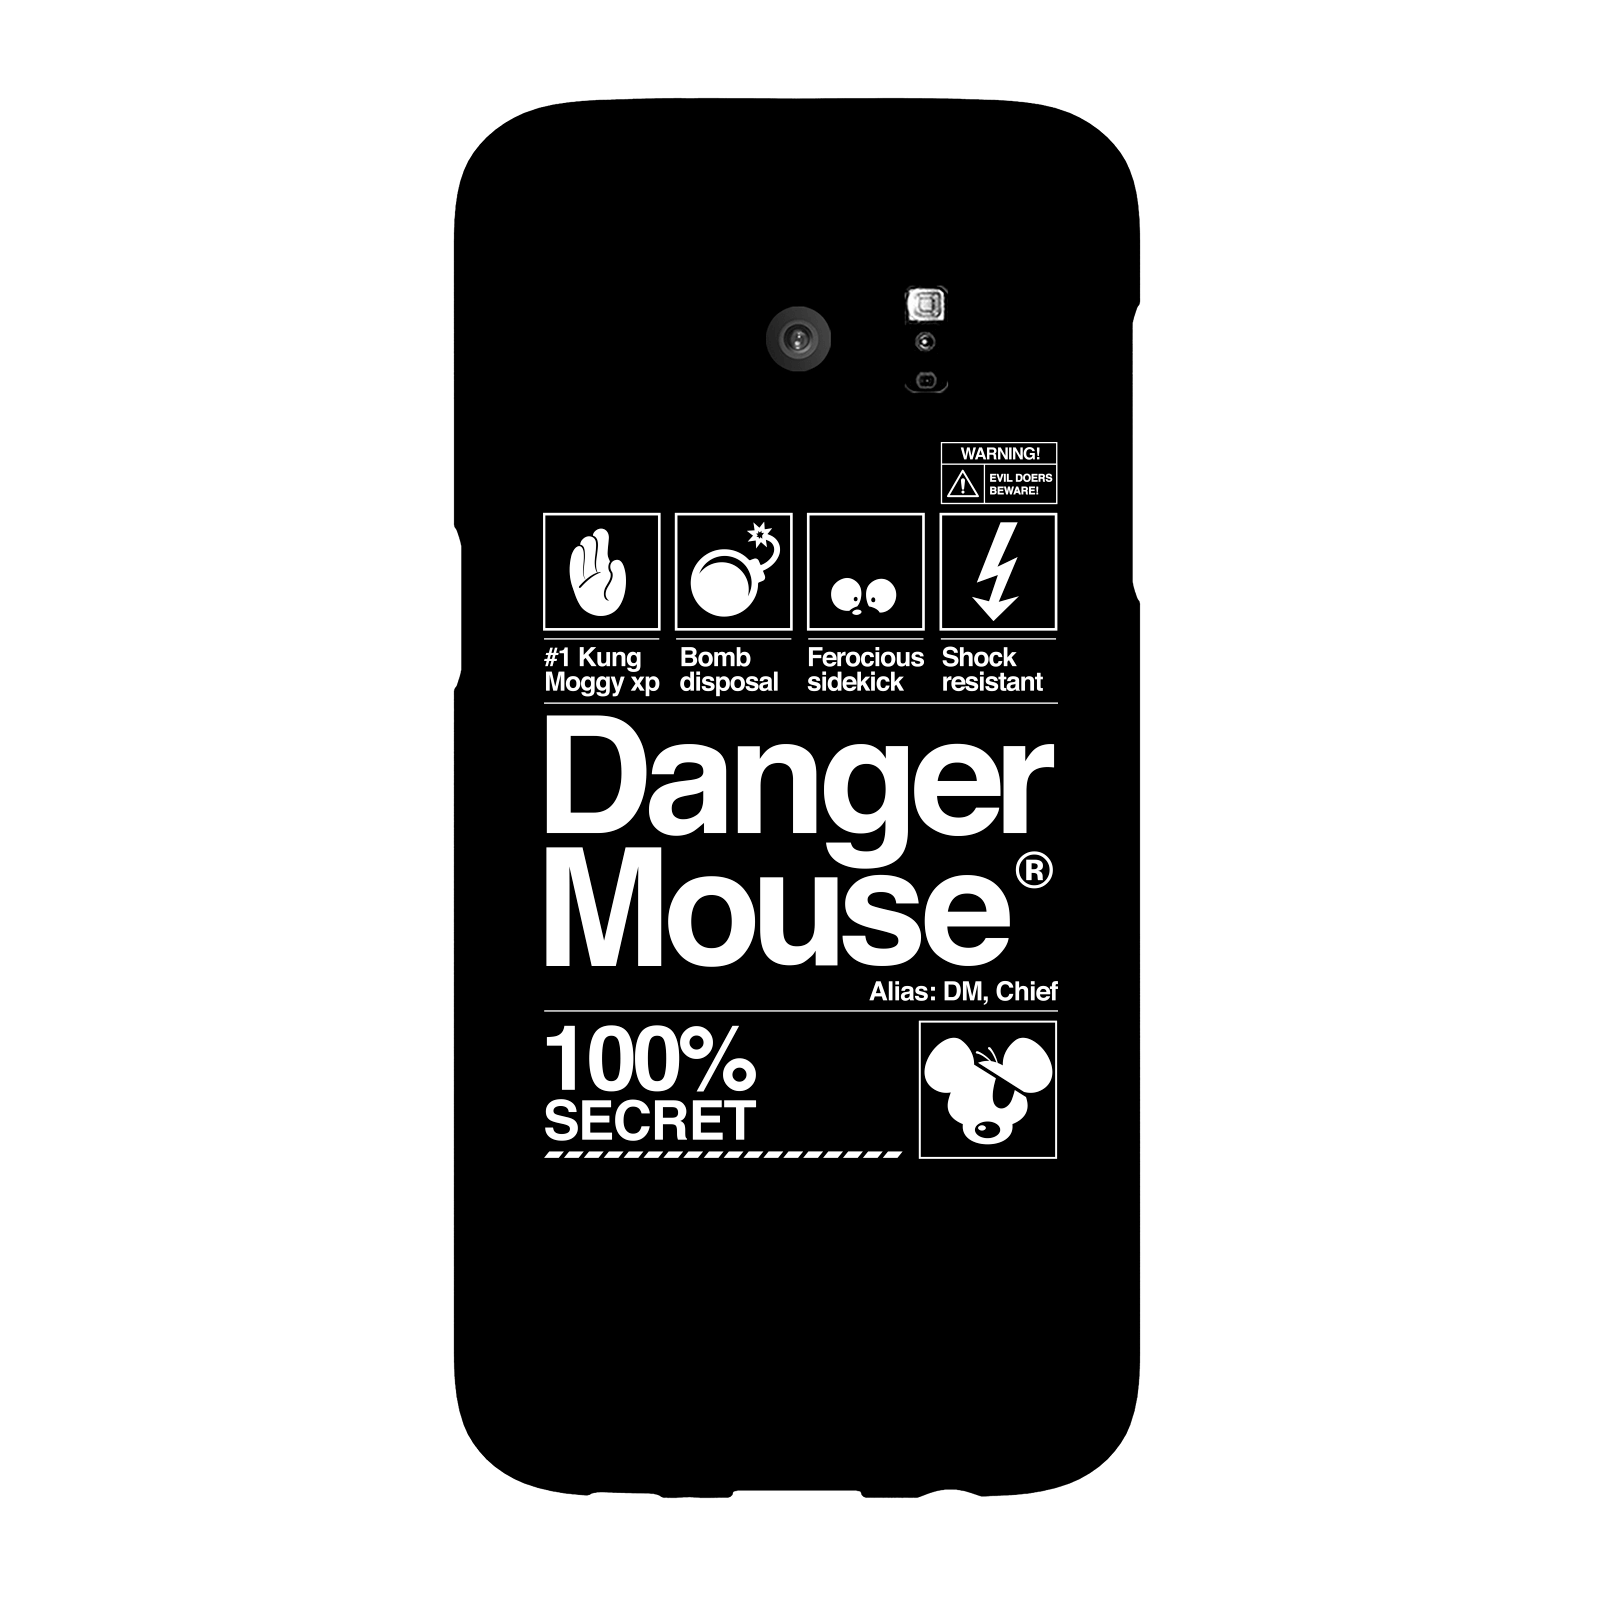 Danger Mouse 100% Secret Phone Case for iPhone and Android - Samsung S7 Edge - Snap Case - Gloss